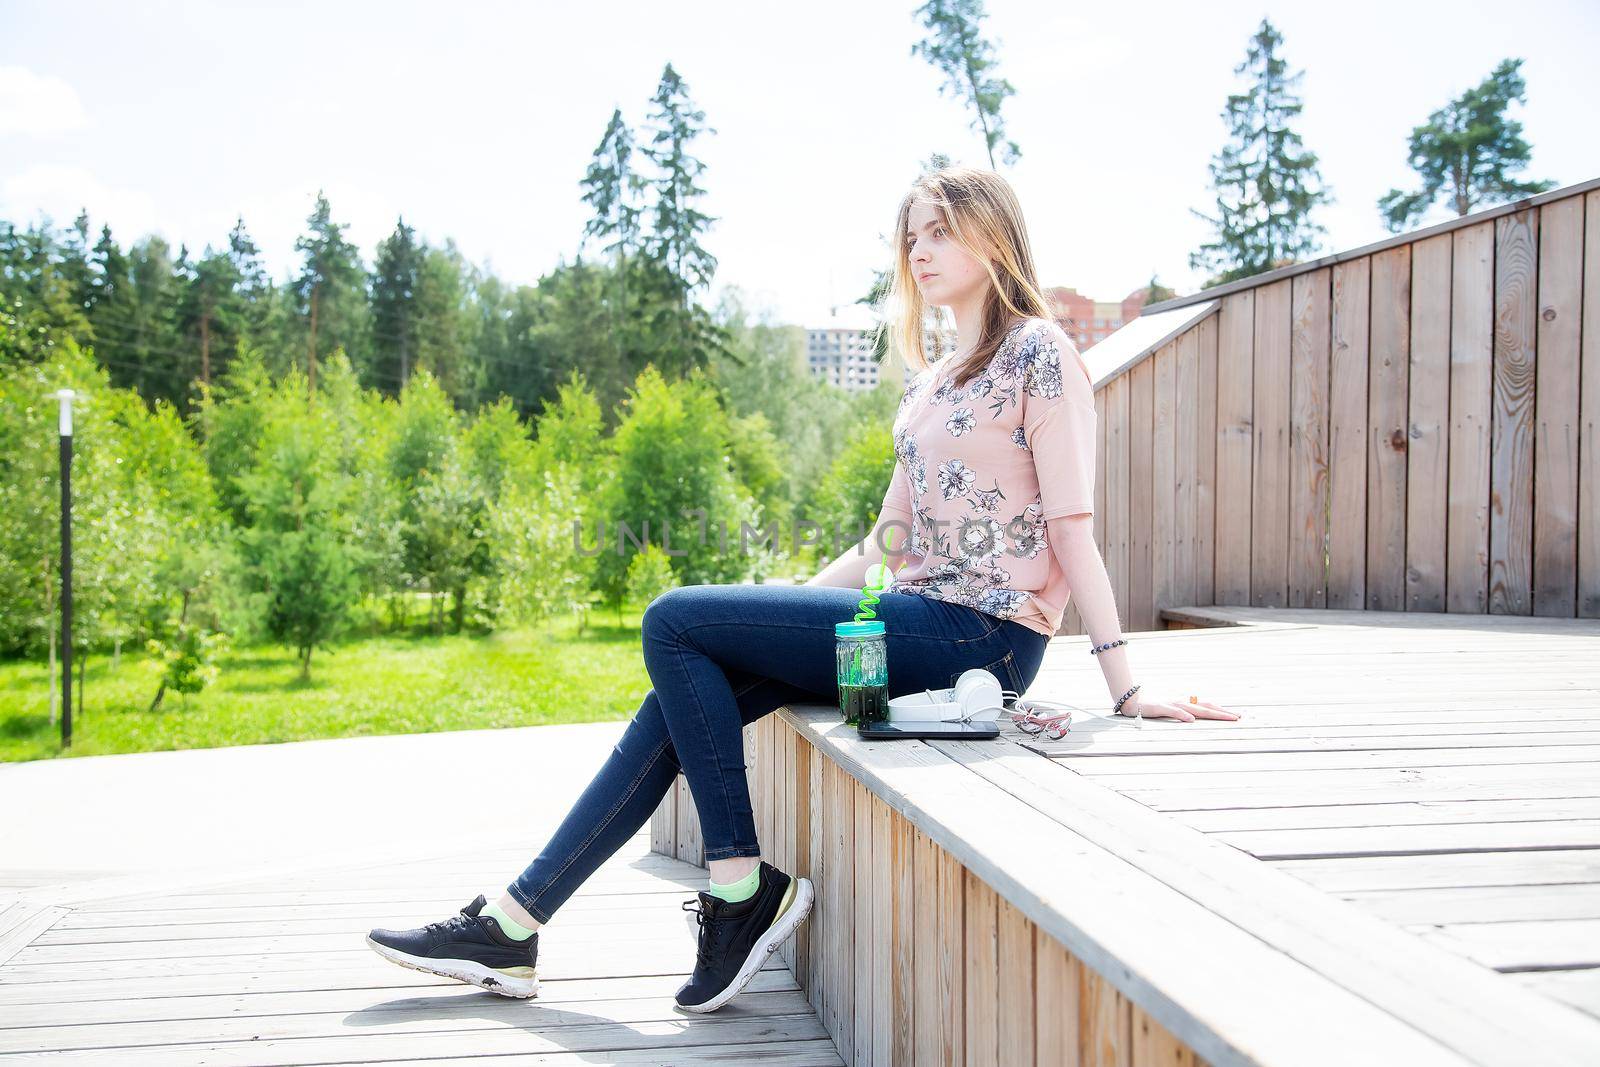 A young girl of 20 years old Caucasian appearance enjoys the sun and weather while sitting on a wooden podium in the park on a summer day.The girl is dressed in a floral T-shirt and jeans